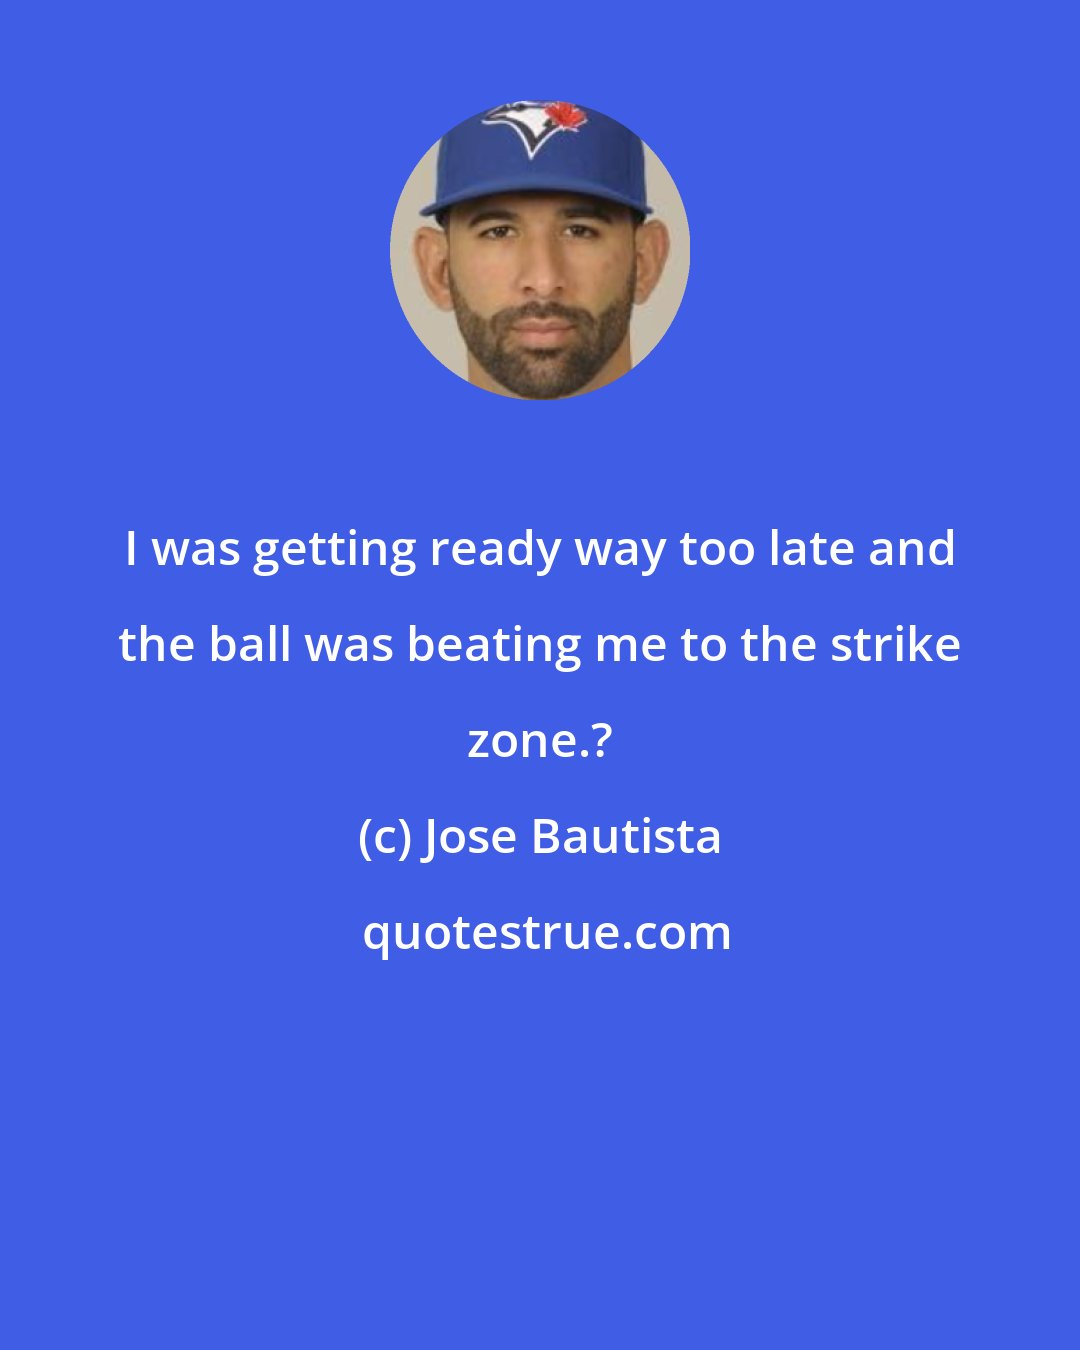 Jose Bautista: I was getting ready way too late and the ball was beating me to the strike zone.?